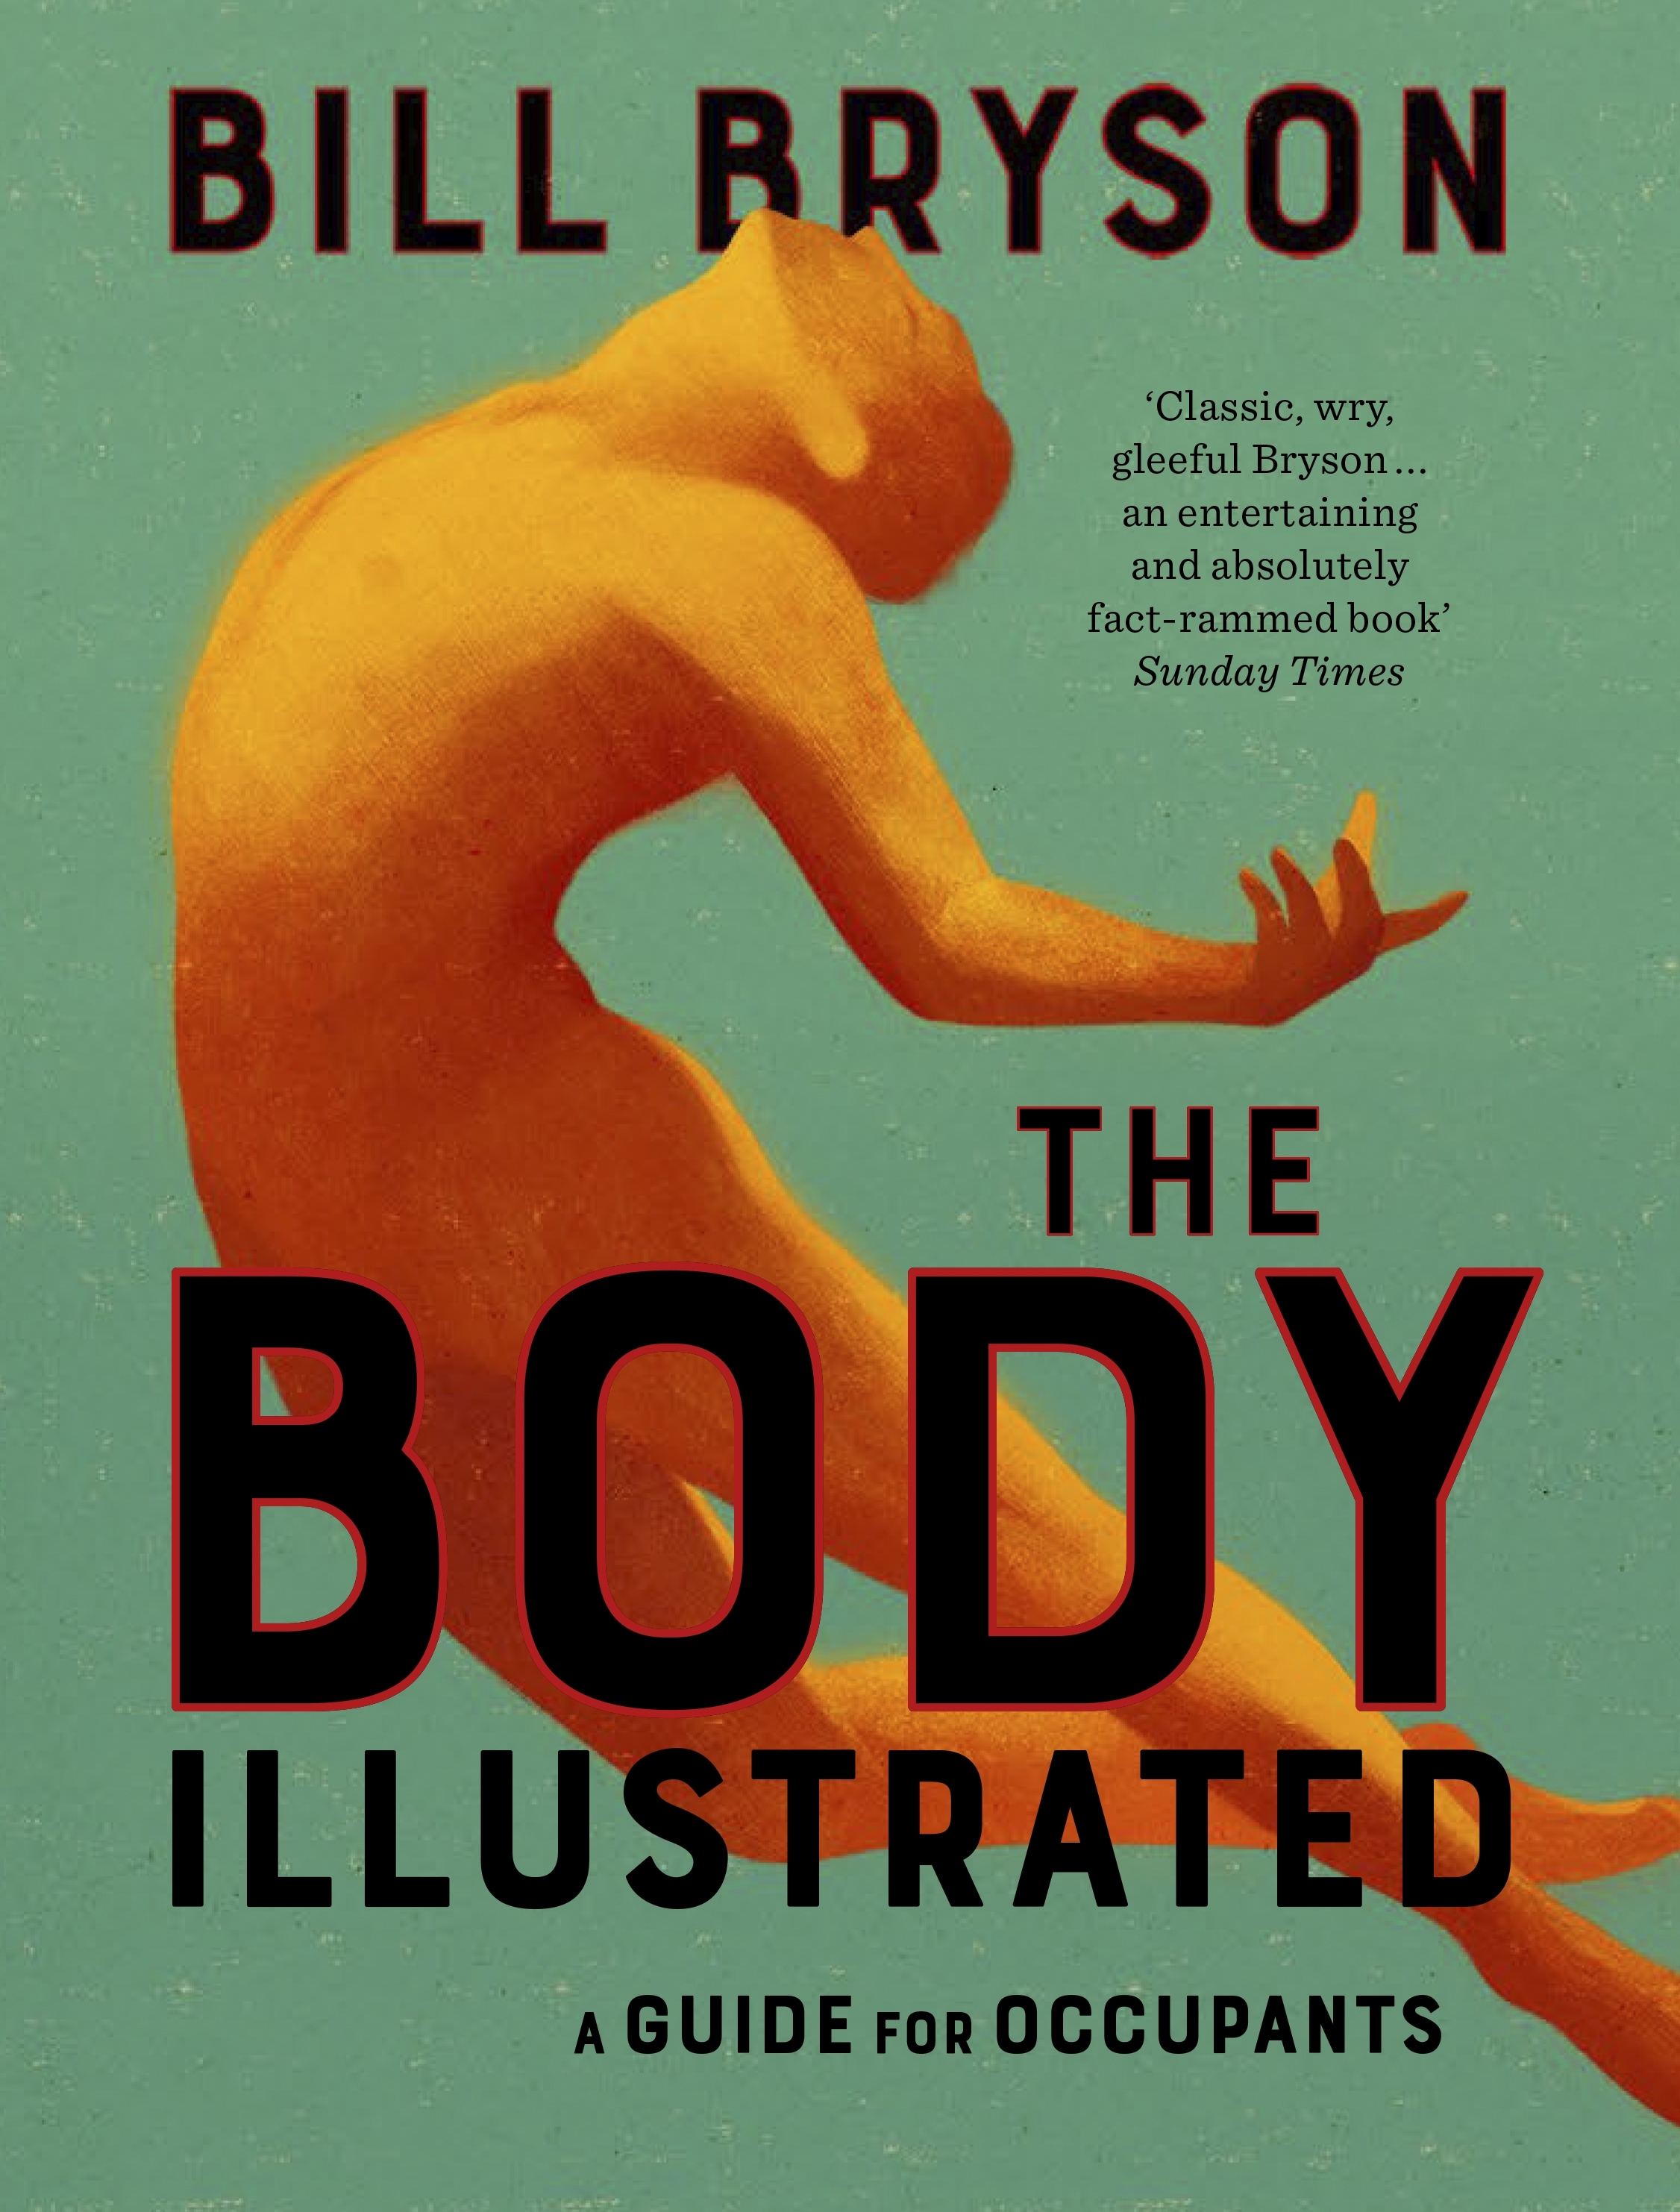 The Body Illustrated. A guide for occupants